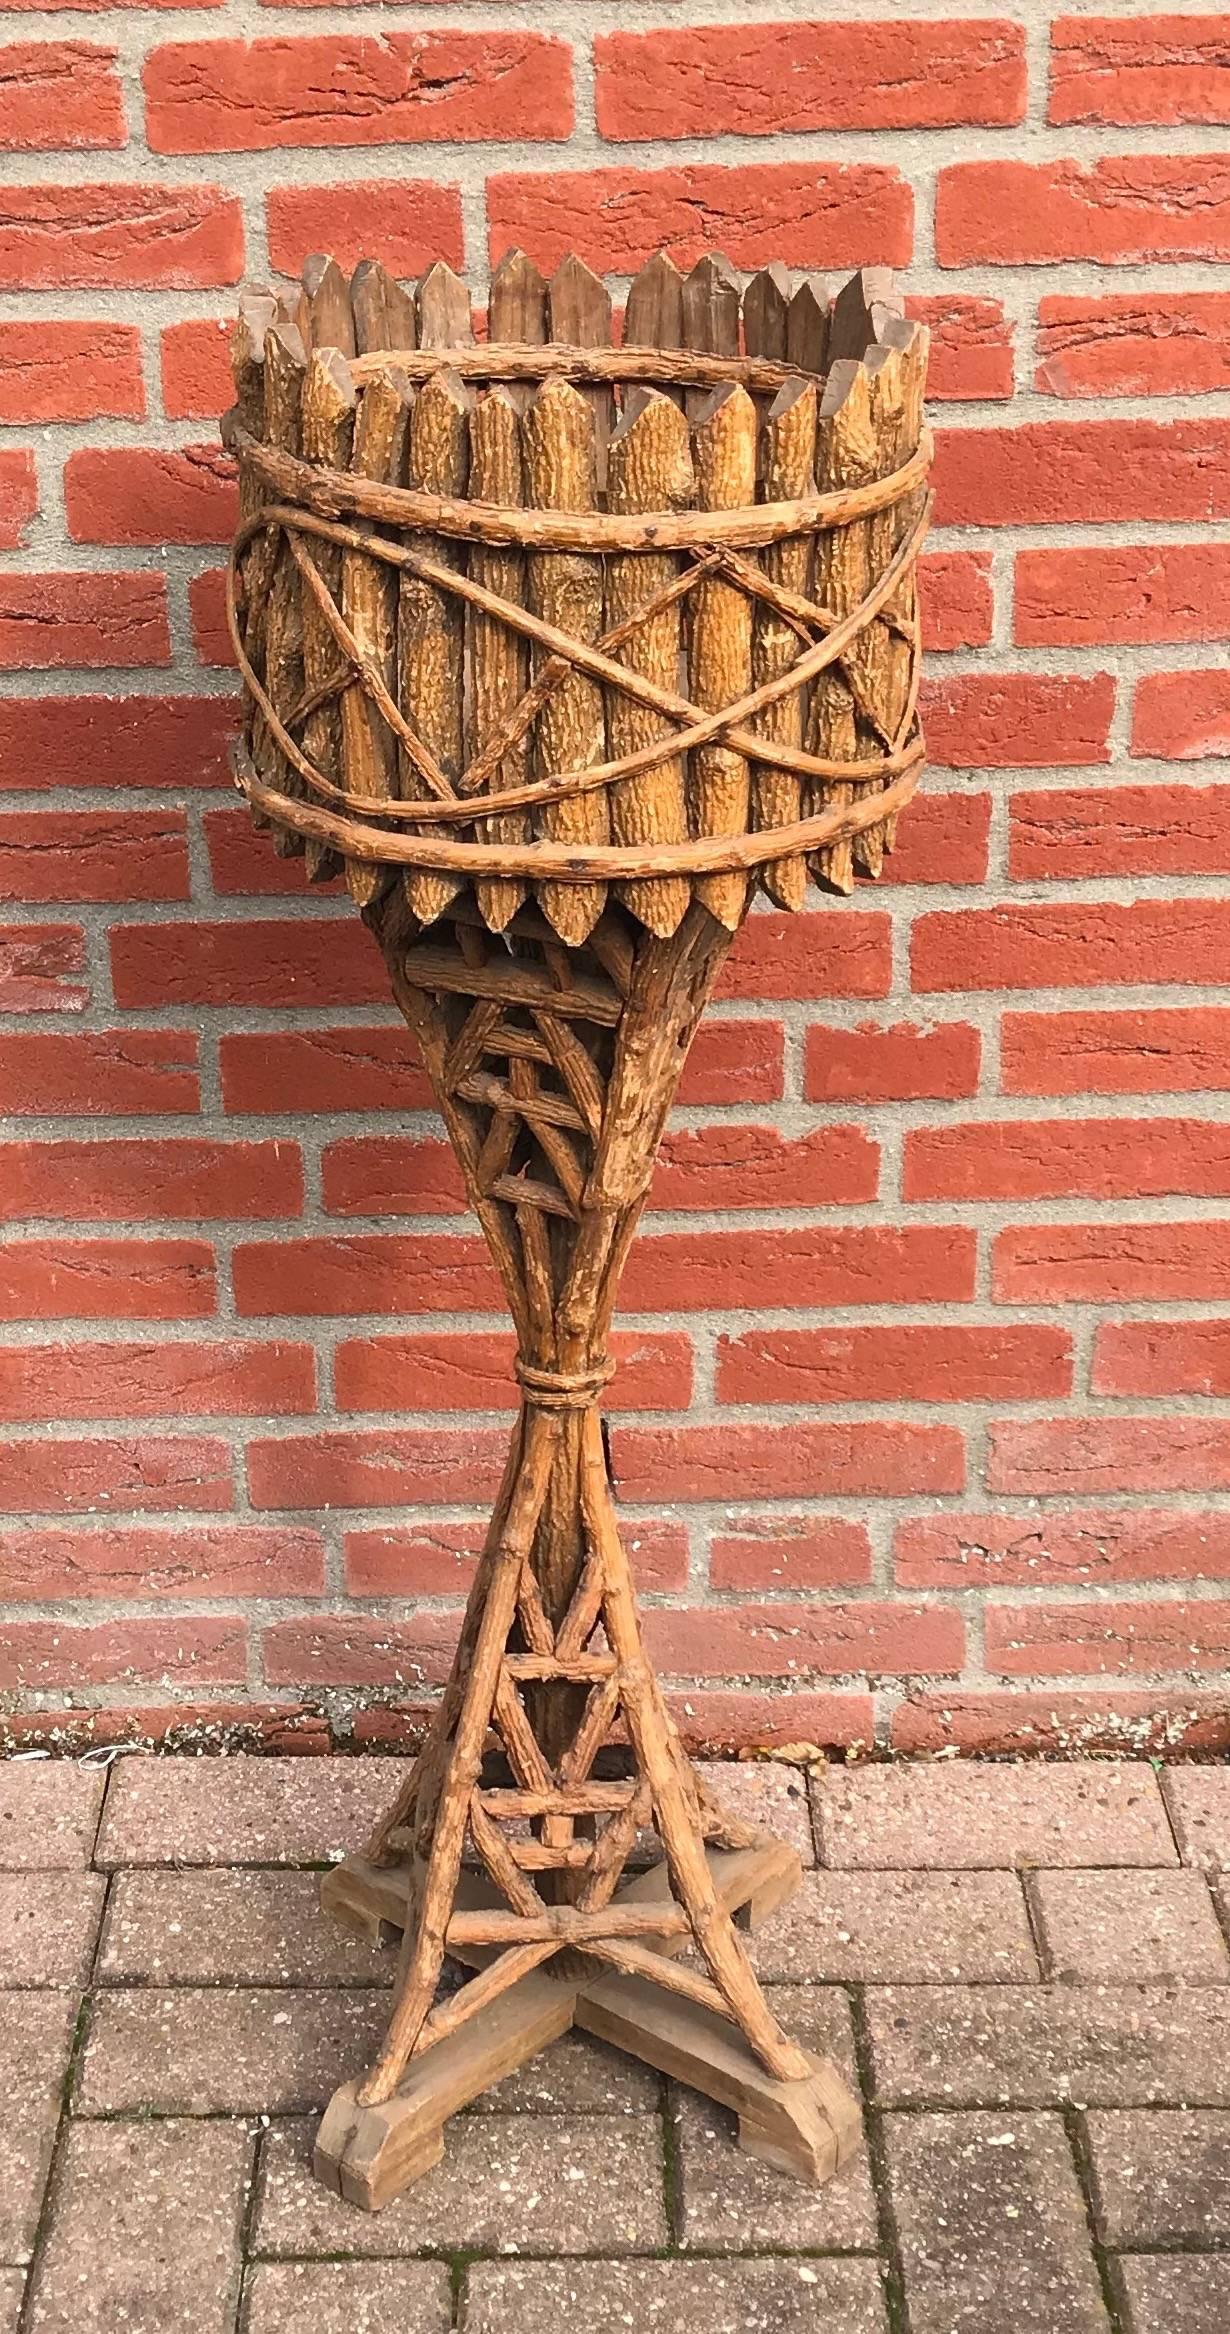 Stunning Early 1900 Handmade Folk Art Jardiniere.

This antique, one piece plant stand is a fine example of the craftsmanship and the wonderful designs of bygone times. Where else then on 1stdibs can you find such one of a kind items with great